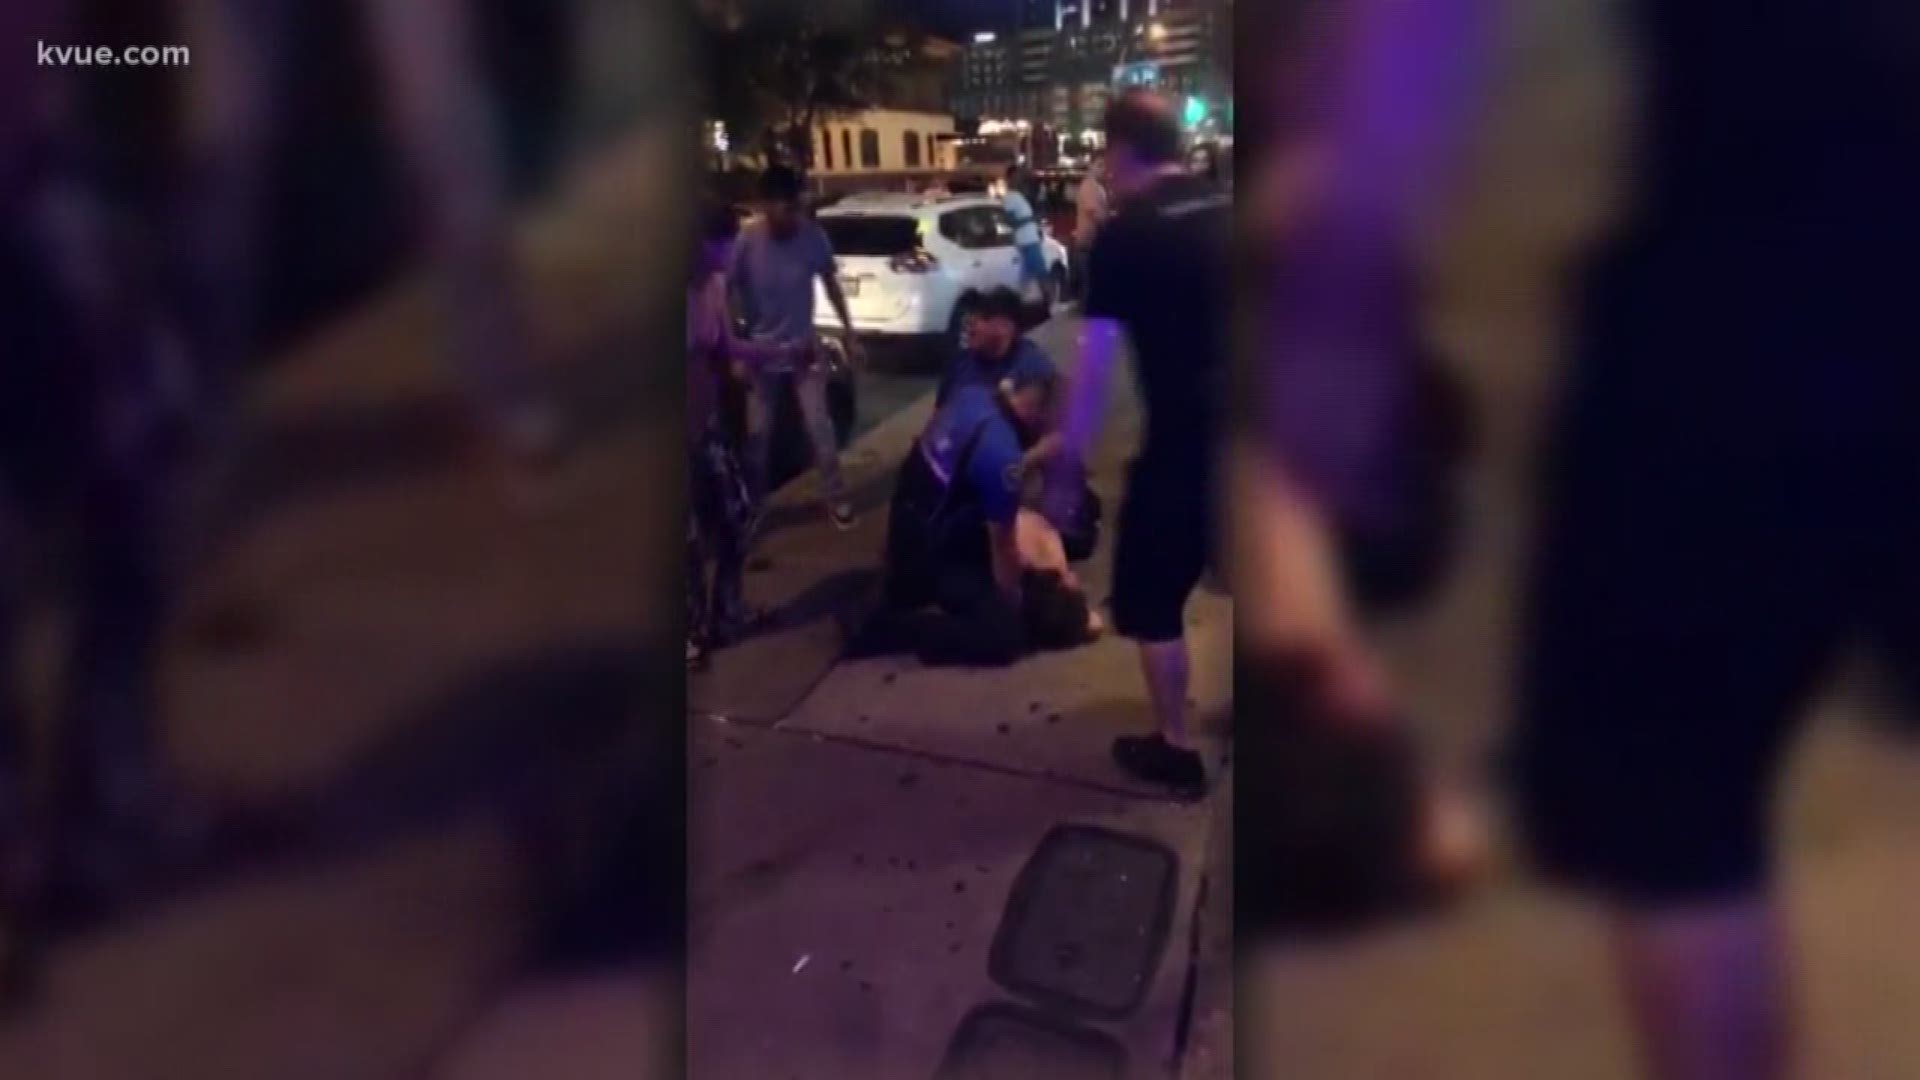 We are hearing from the man seen in a viral video that shows an Austin police officer striking him in the head in the early morning hours of July 4.